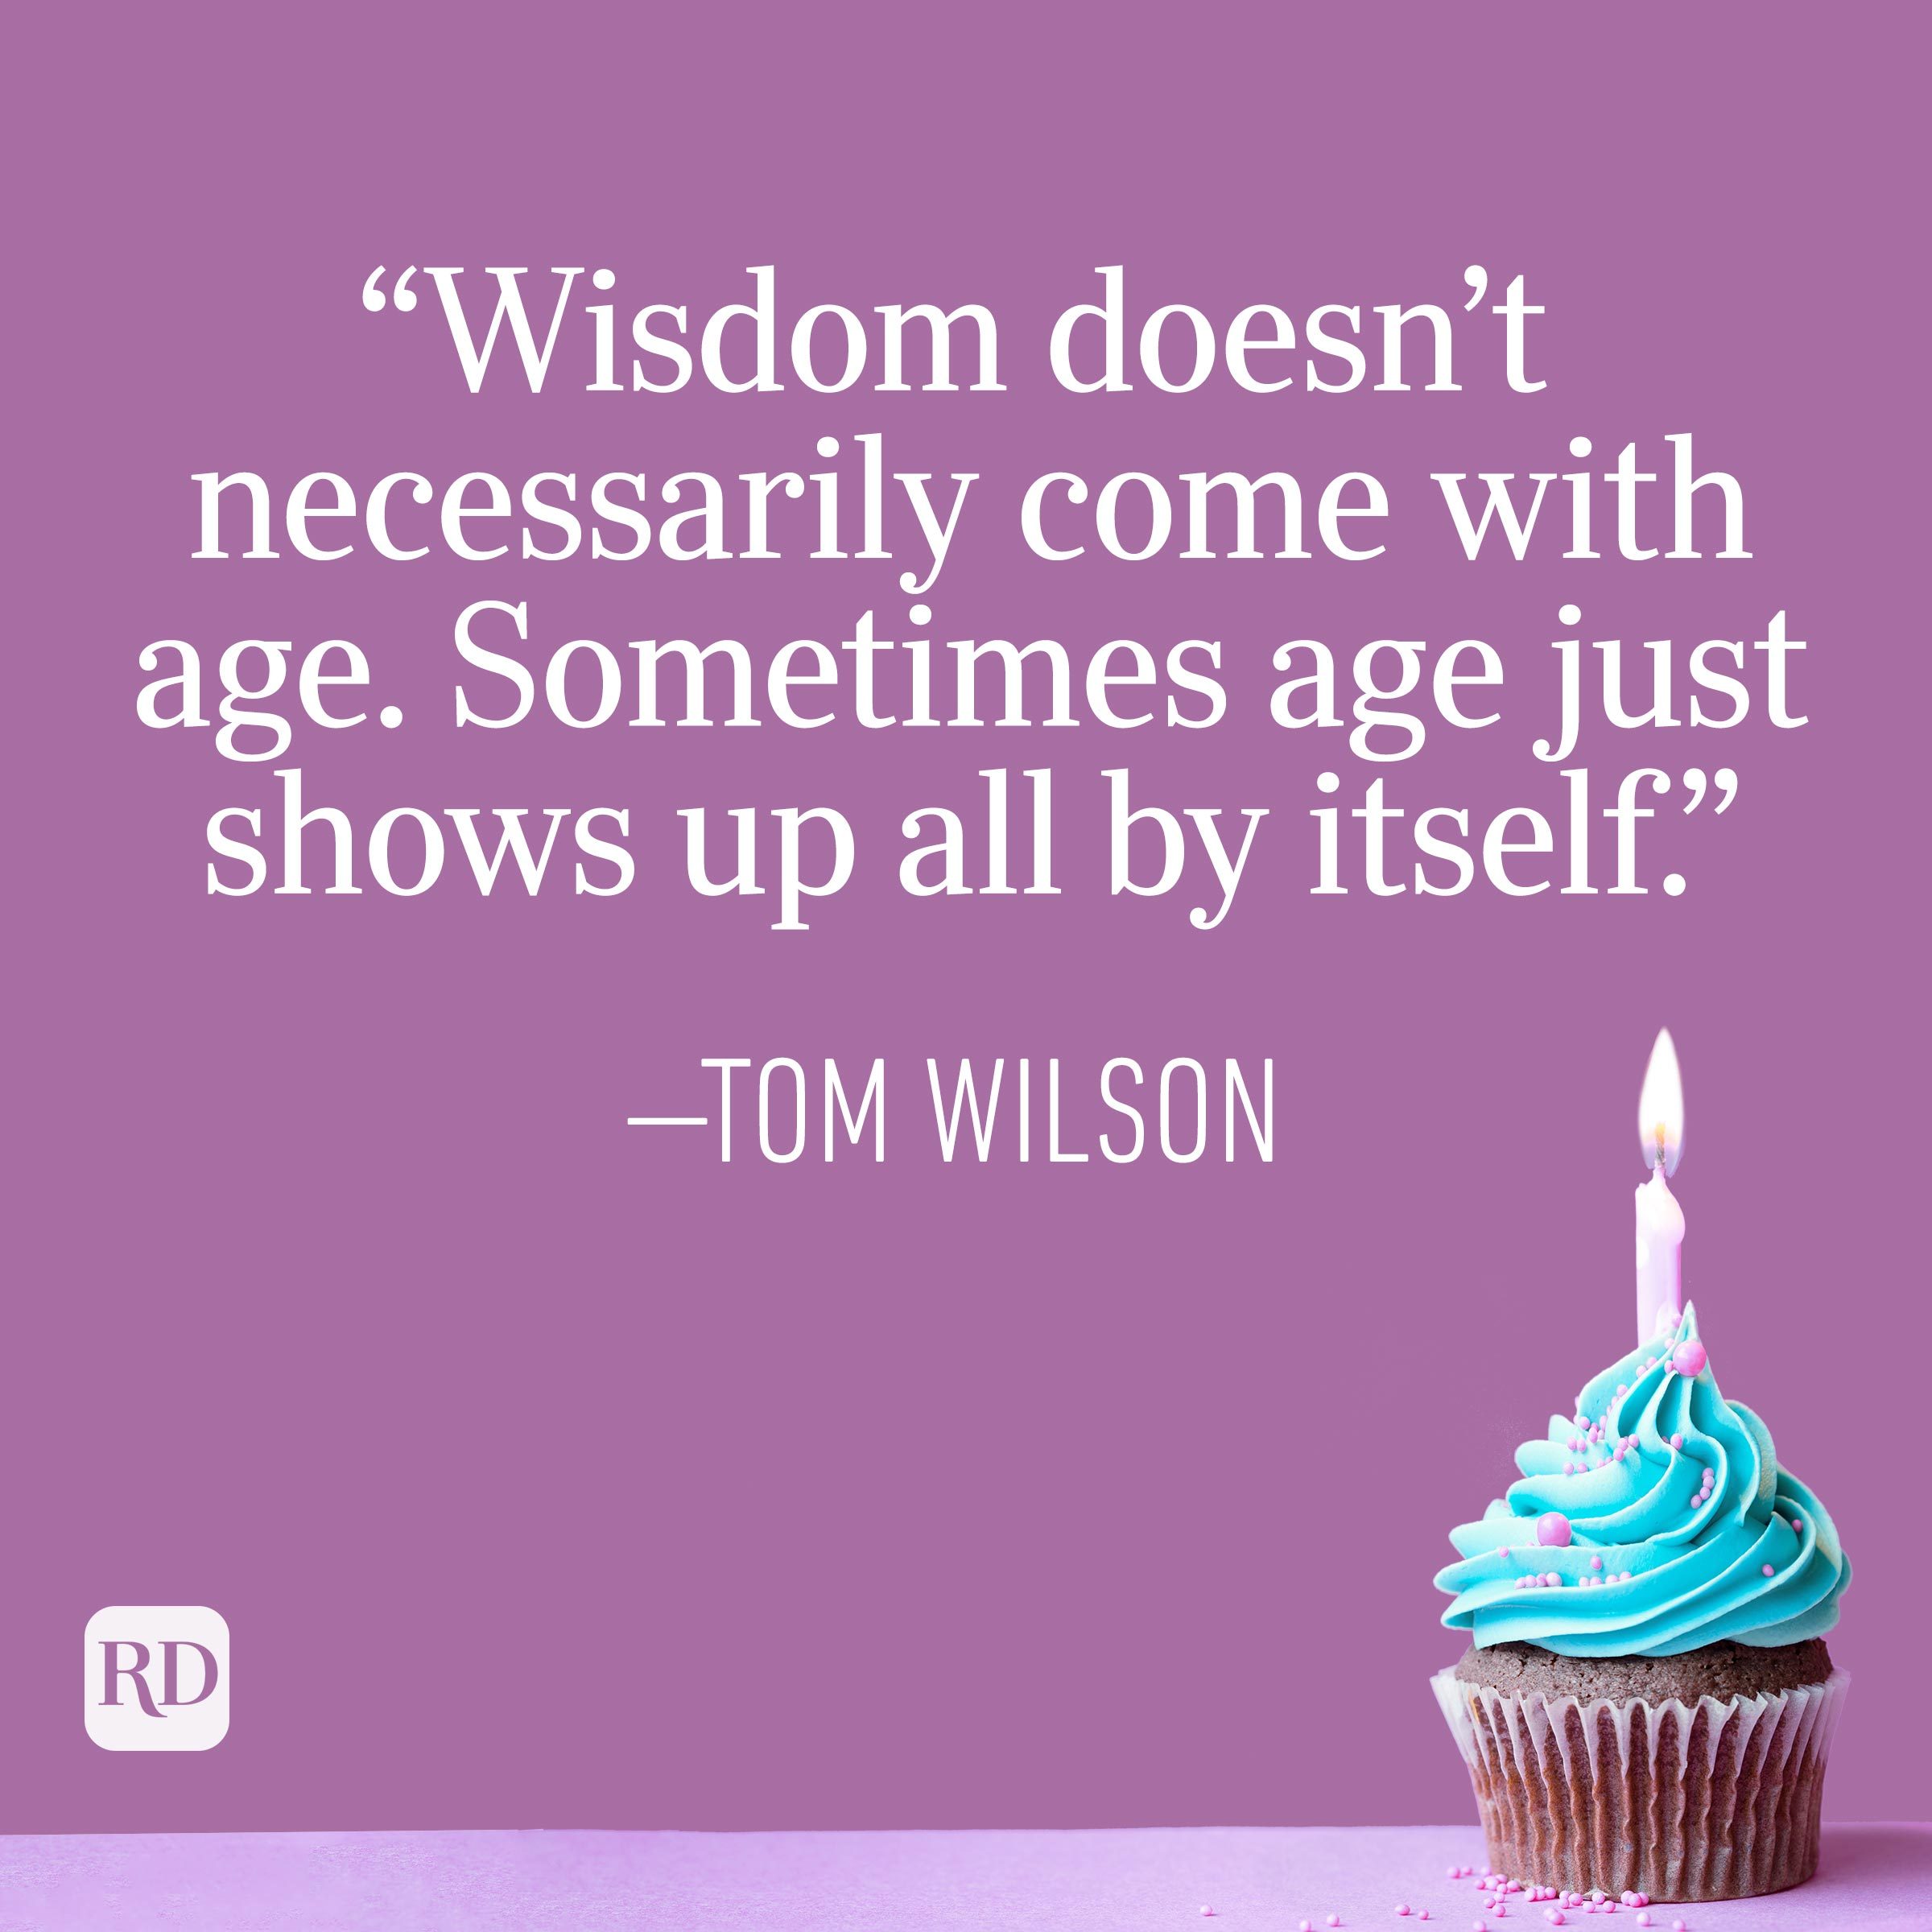 "Wisdom doesn't necessarily come with age. Sometimes age just shows up all by itself." —Tom Wilson